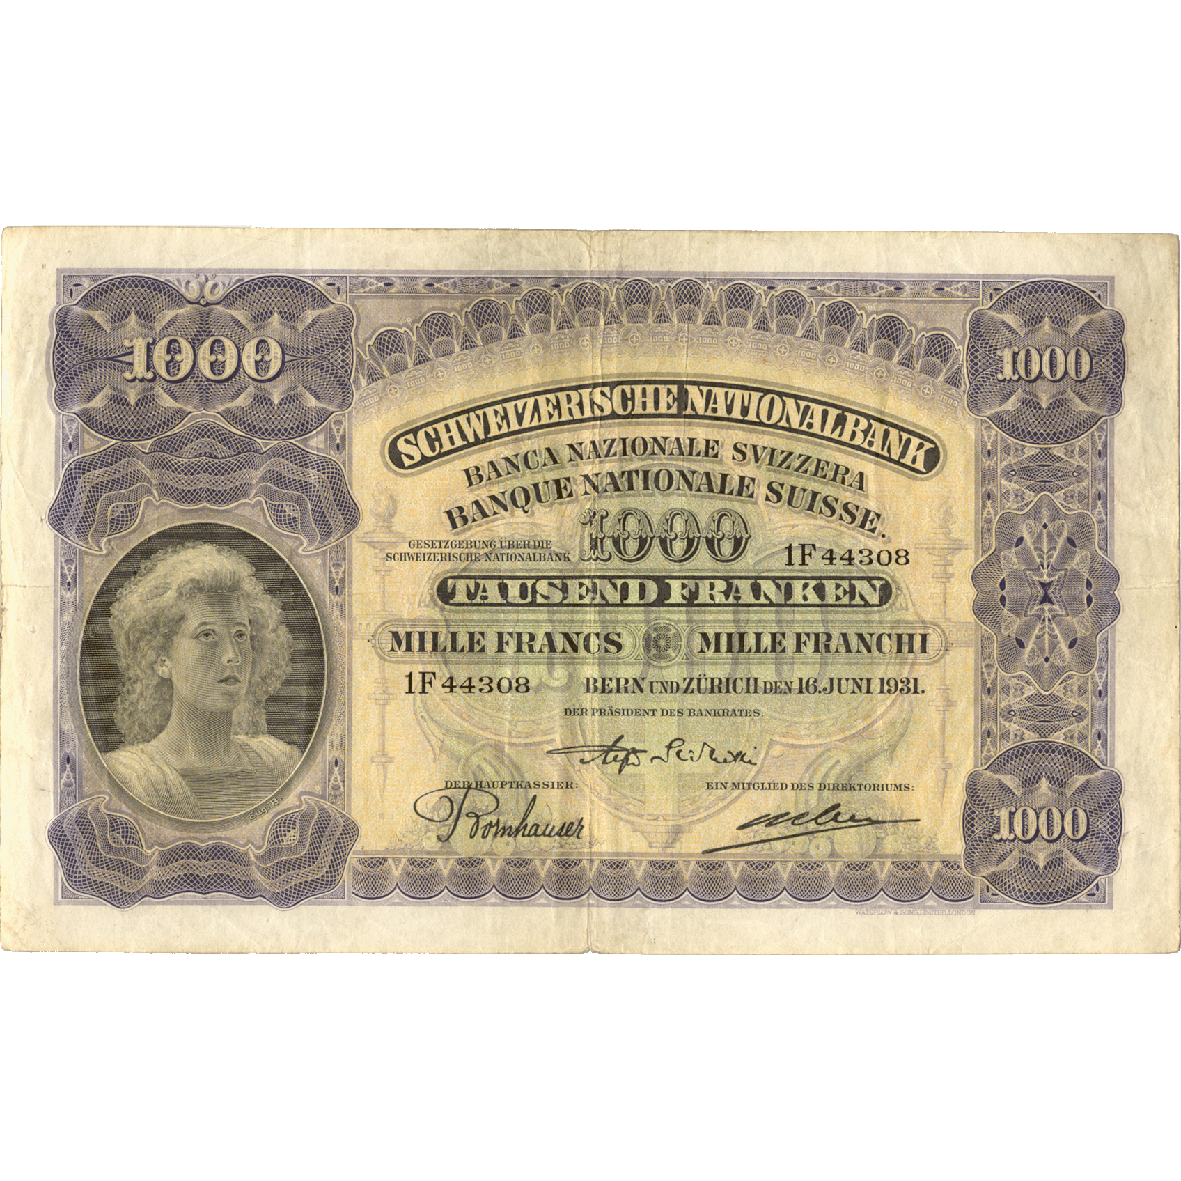 Swiss Confederation, 1,000 Francs (2nd Banknote Series, in Circulation 1911-1980) (obverse)